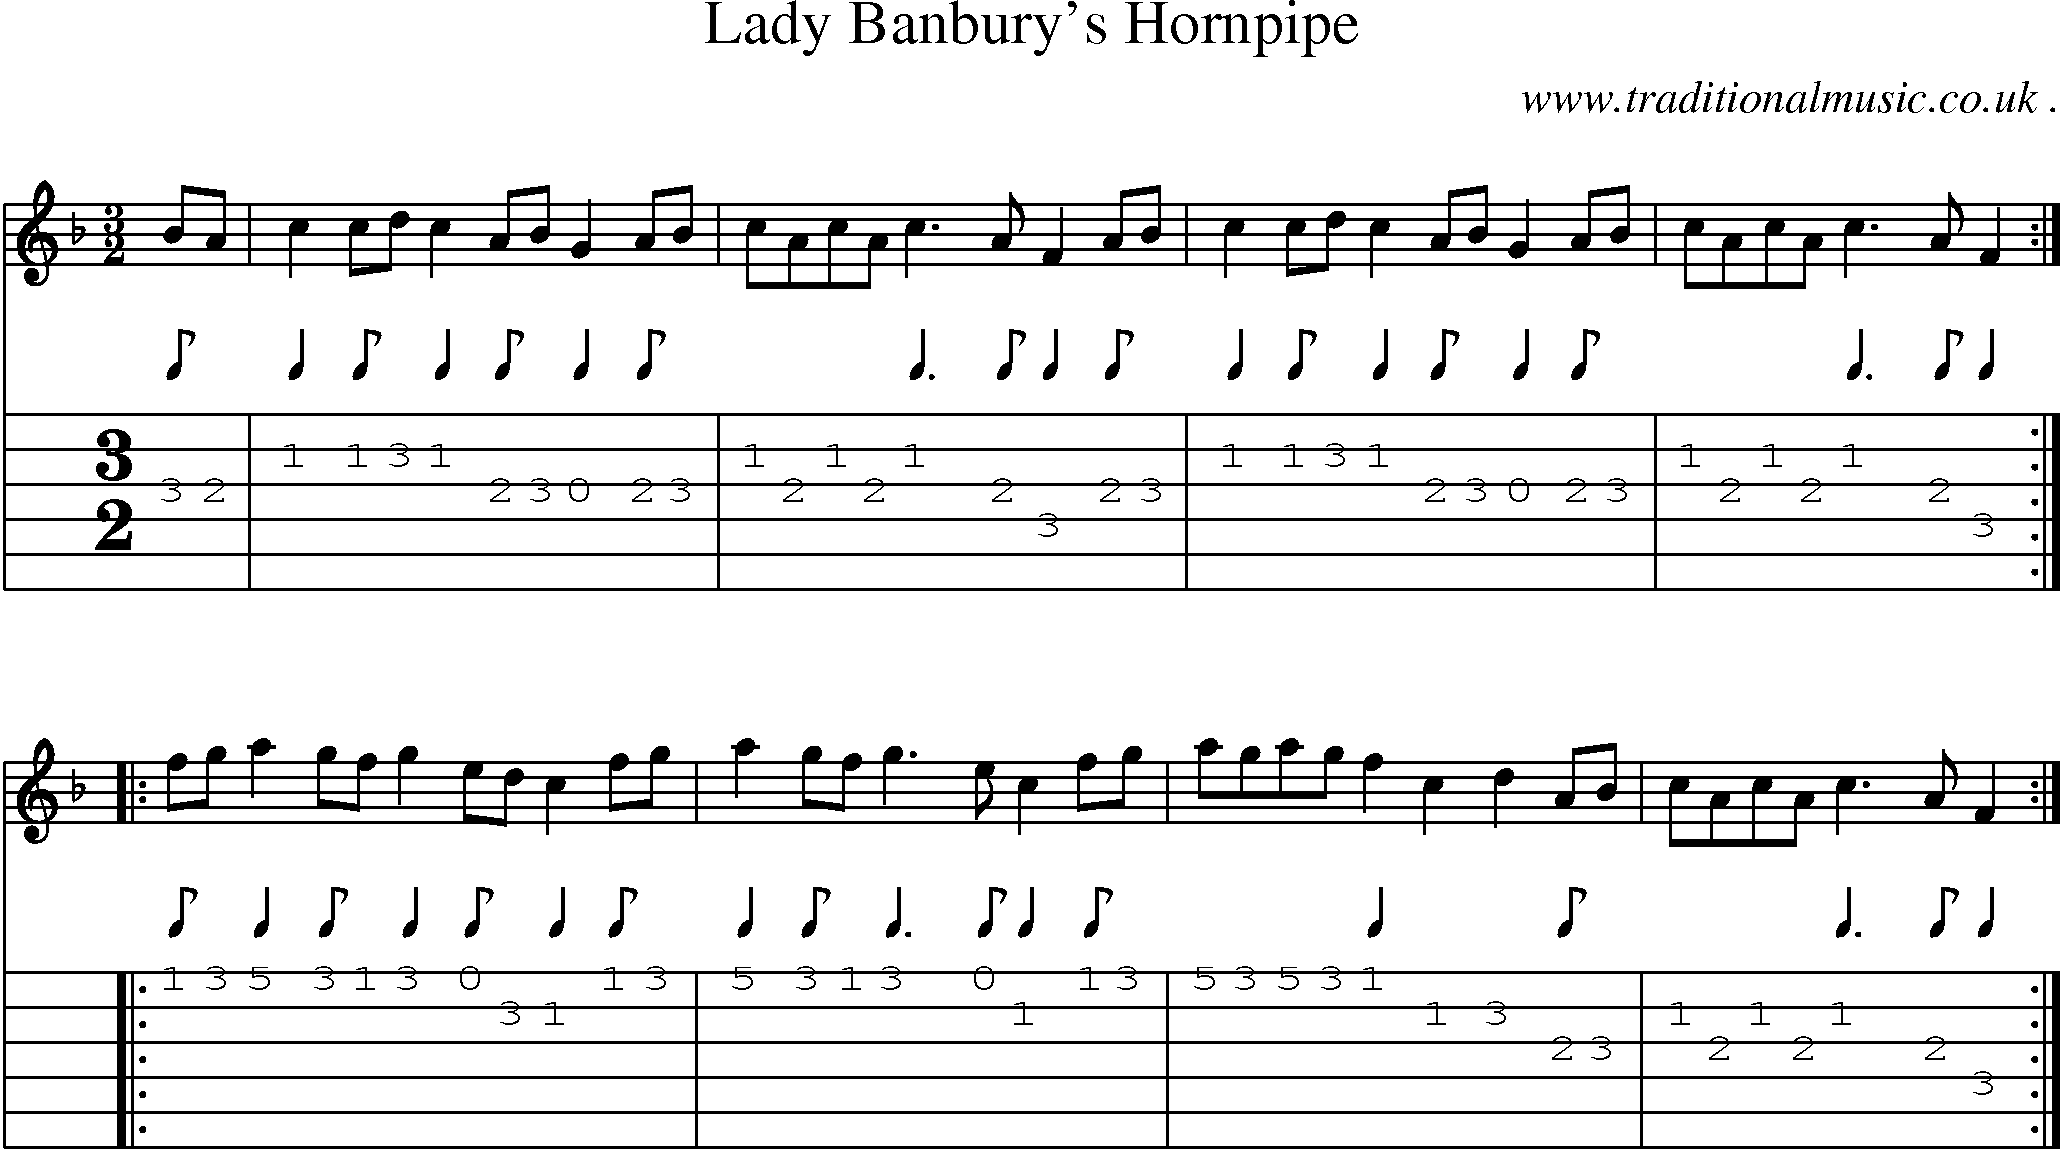 Sheet-Music and Guitar Tabs for Lady Banburys Hornpipe